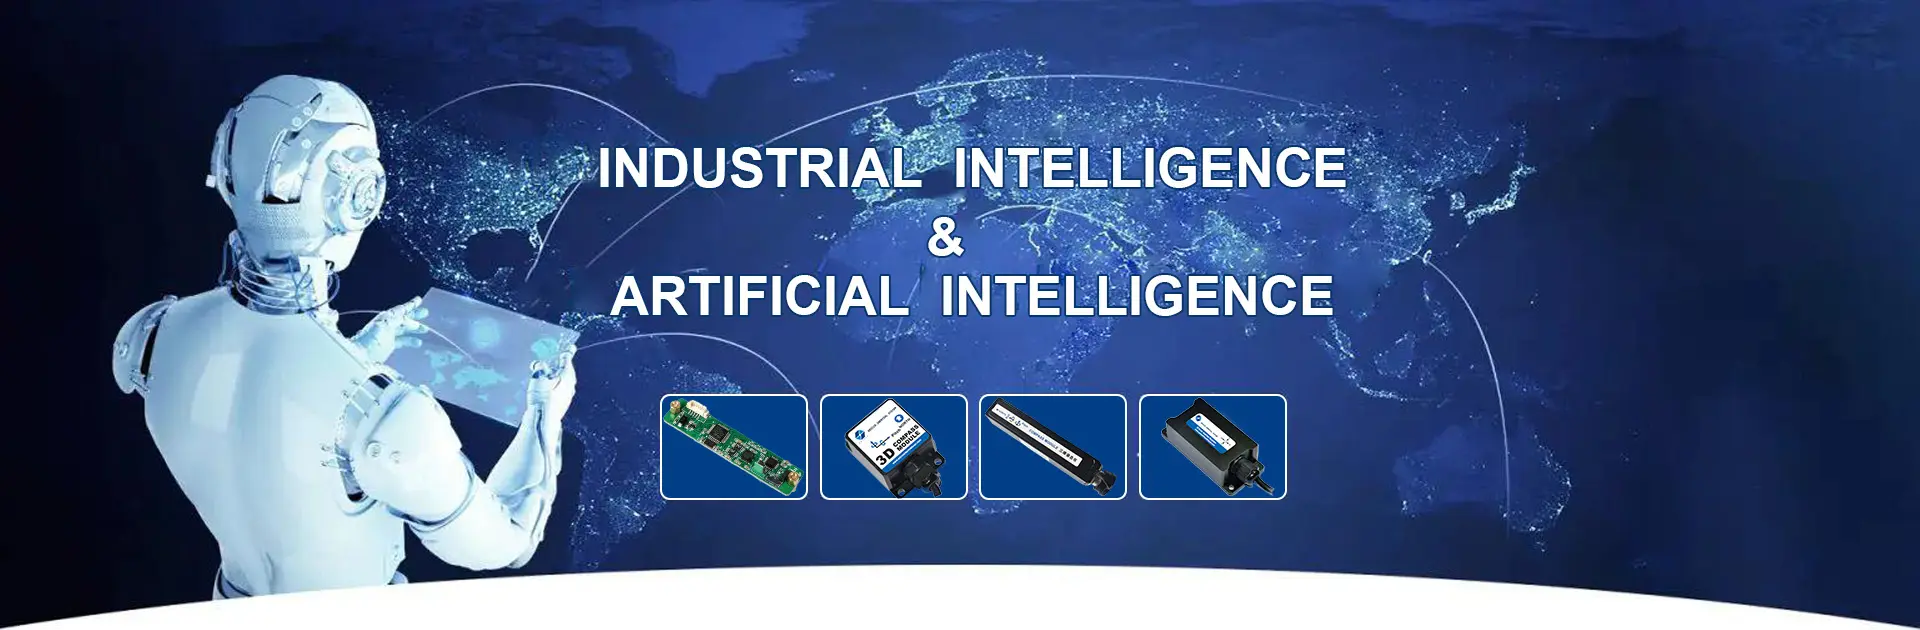 ERICCO-INDUSTRIAL-INTELLIGENCE-ARTIFICIAL-INTELLIGENCE-banner-004